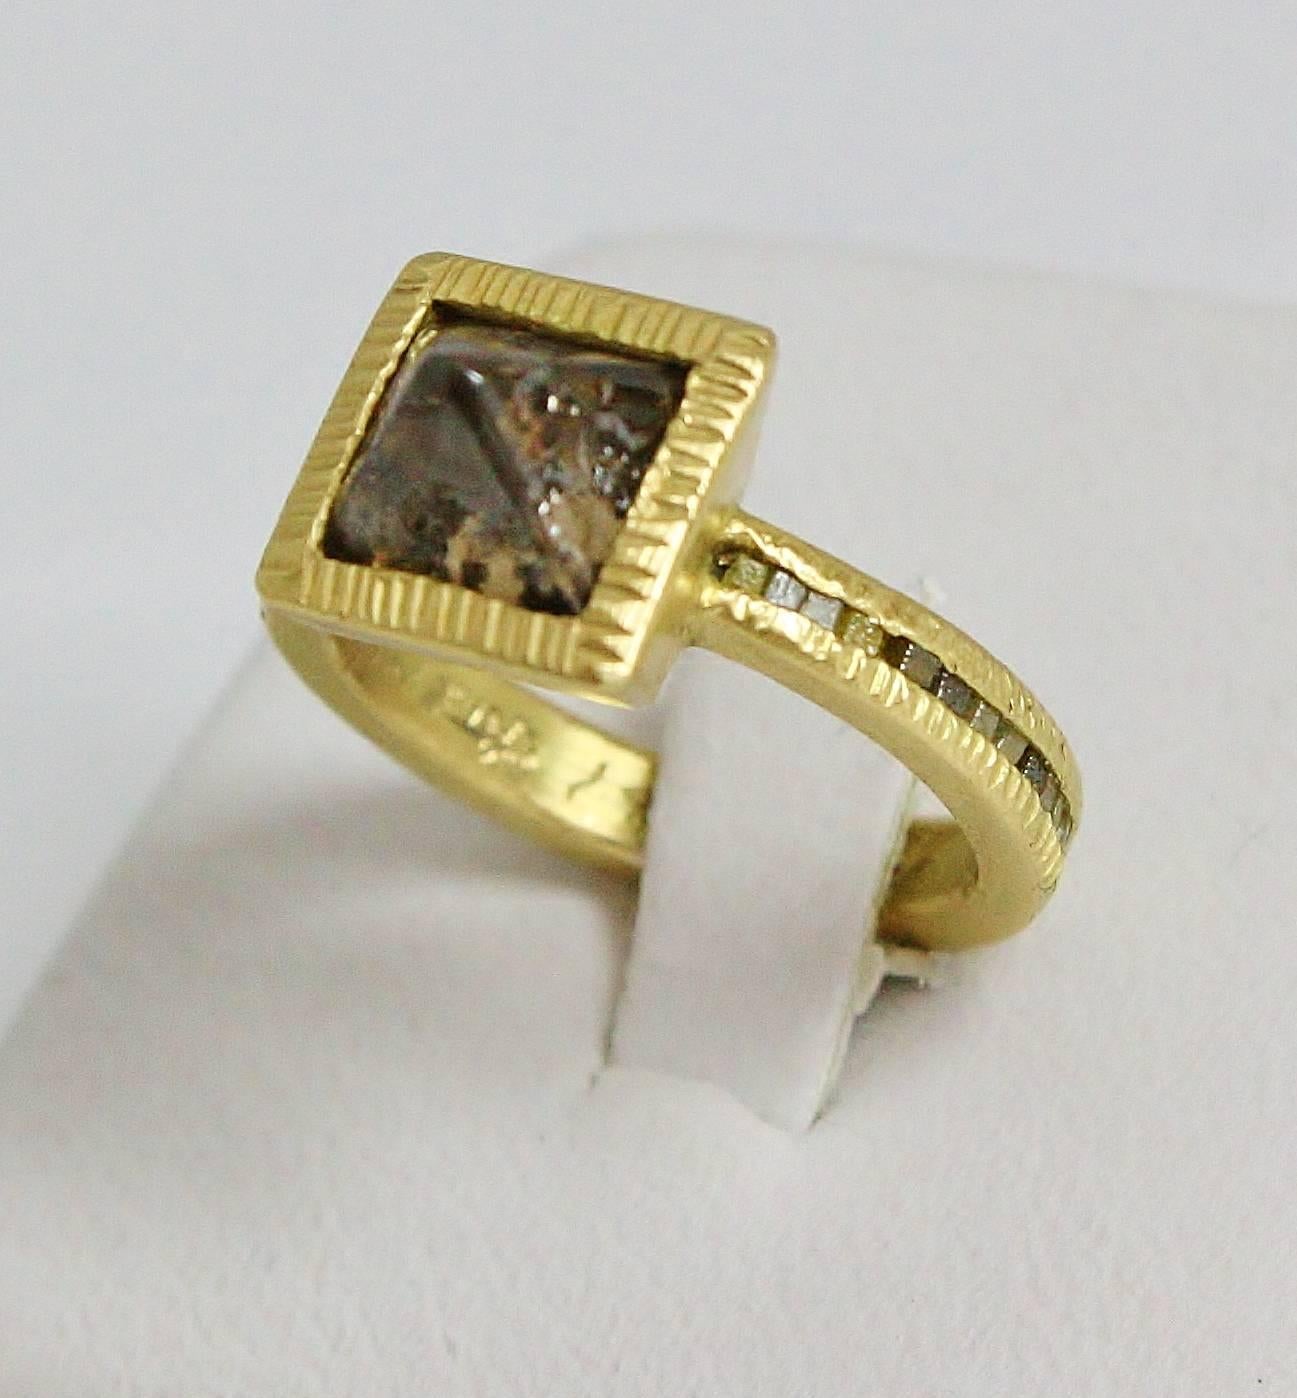 This ring is made of 18kt Yellow Gold with a Raw Octahedron Diamond Center with Raw Diamond Accents along the shank.  The ring weighs 7.45 grams and is a size 5 3/4. It has a 9.9mm square top that is 5.5mm tall with a 3.11mm thick shank. The Center